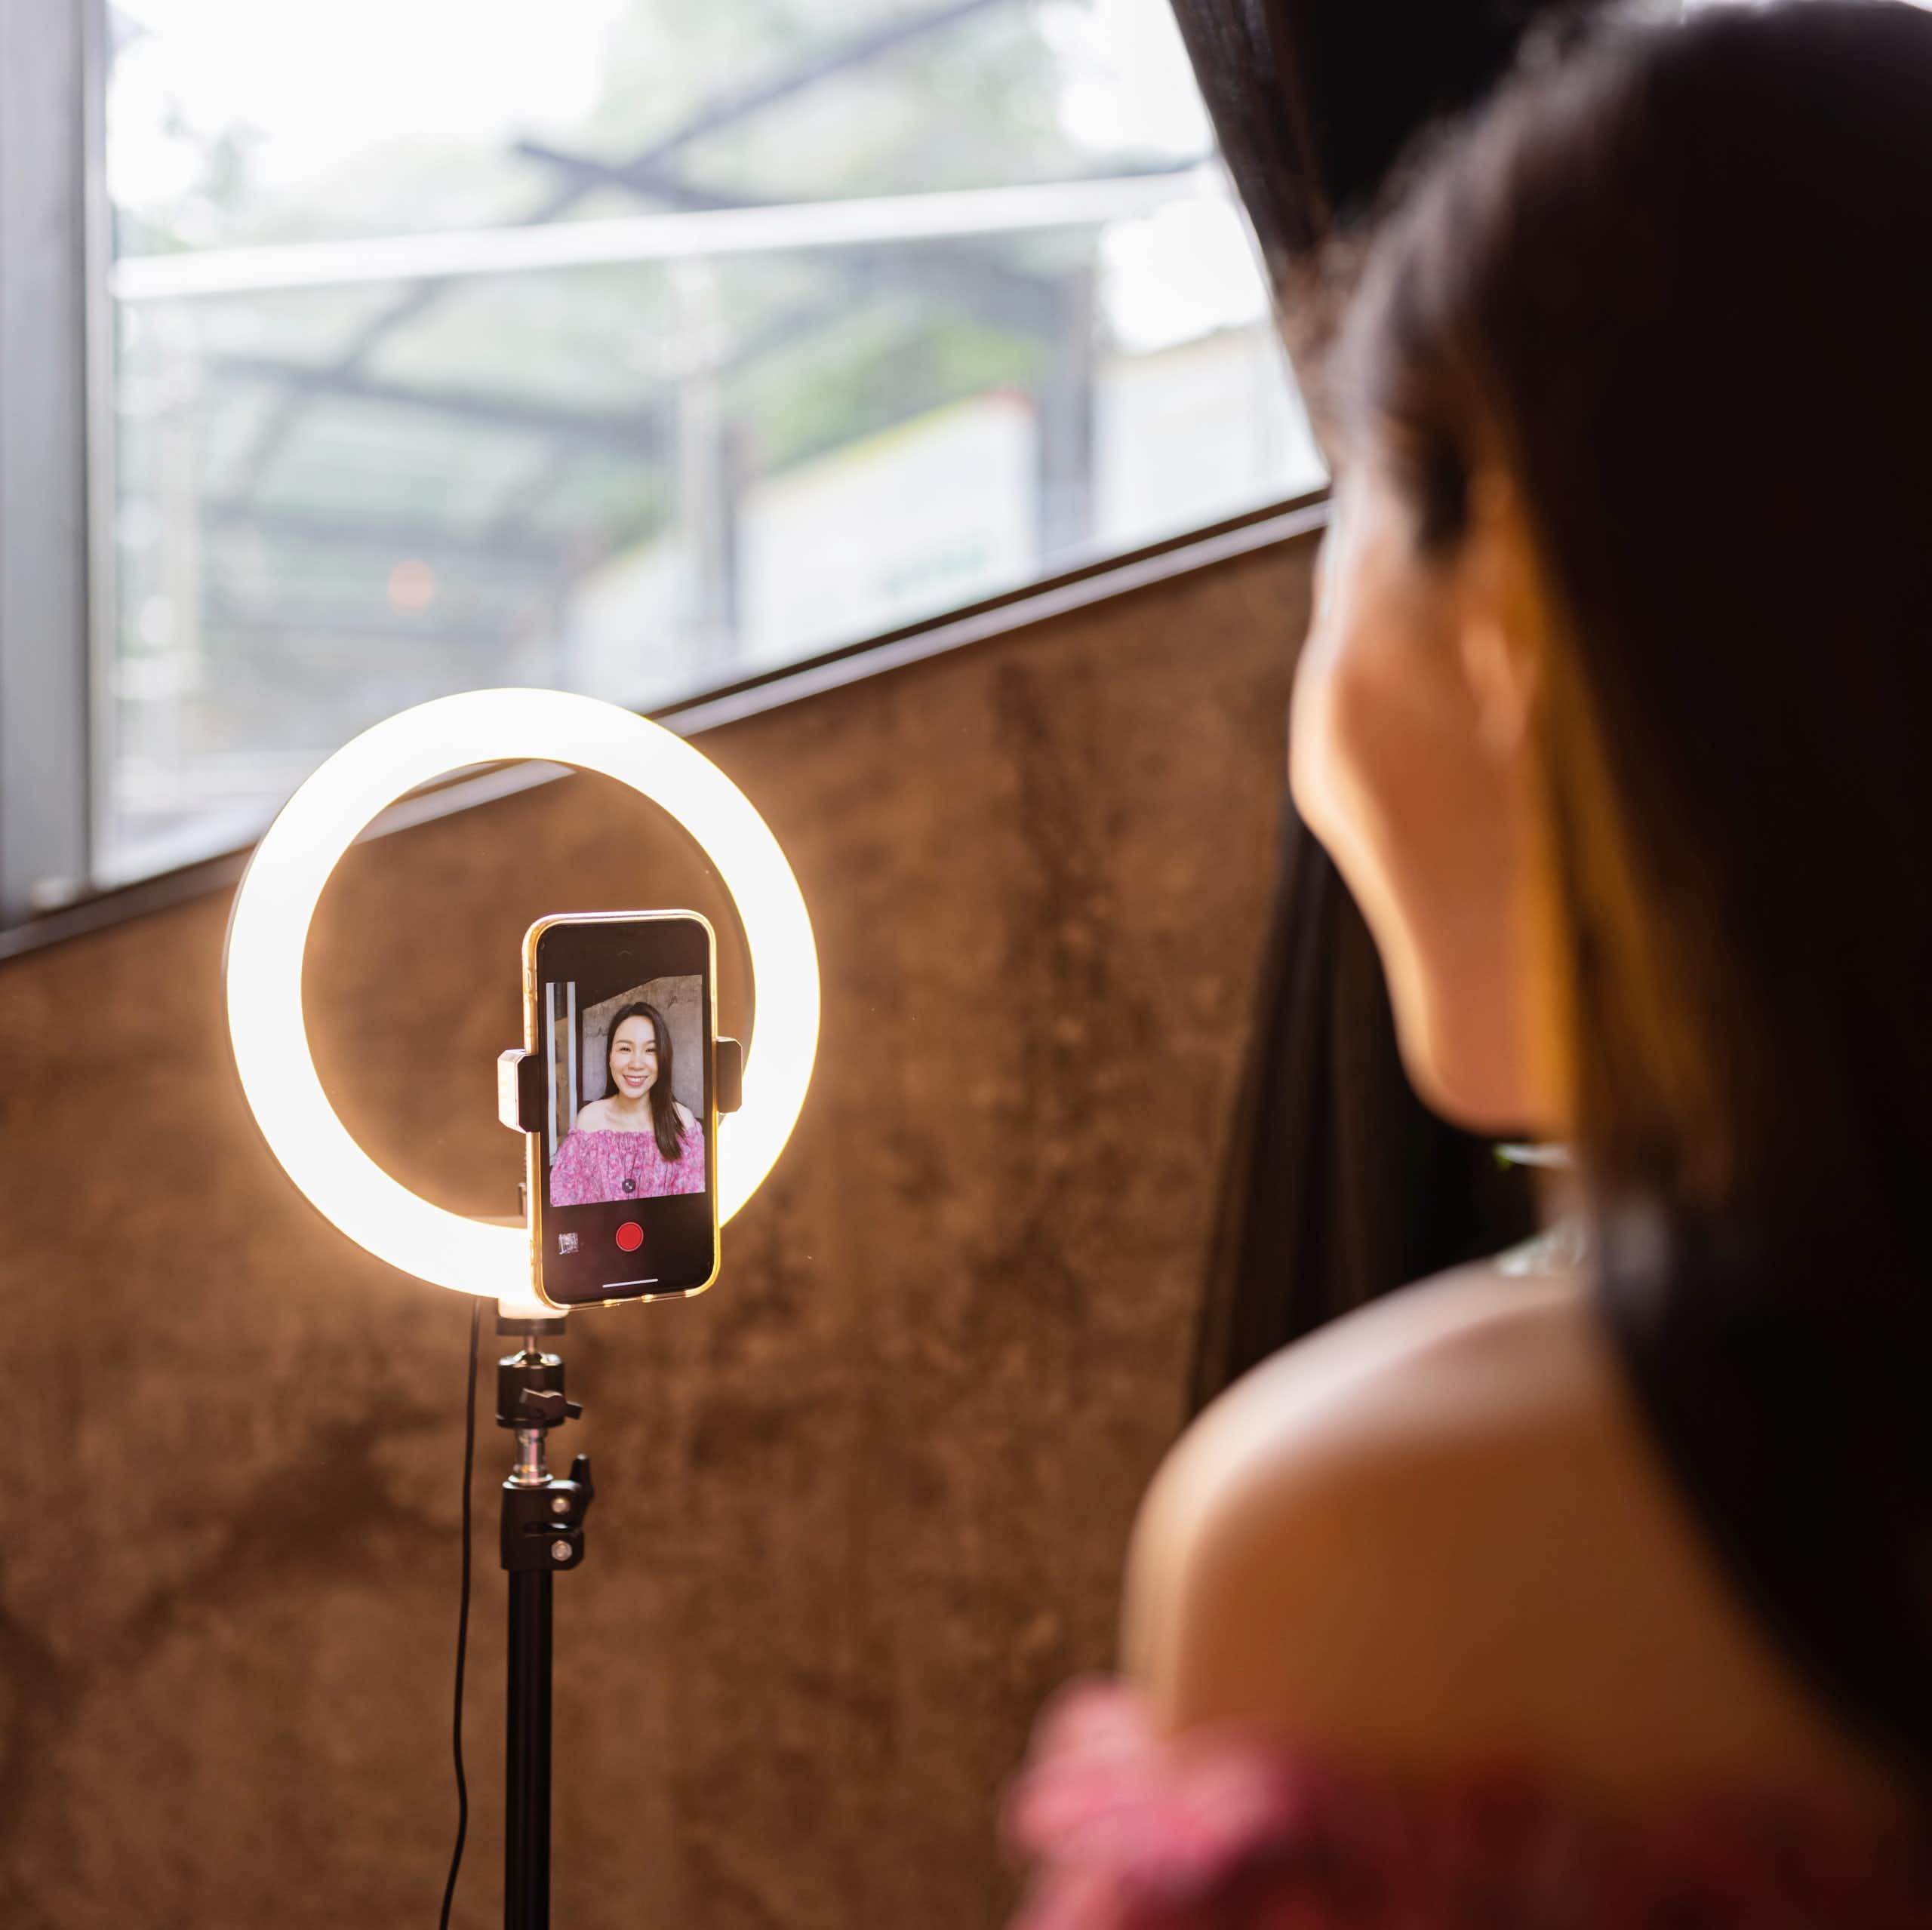 An influencer users her phone and a ring light to film.